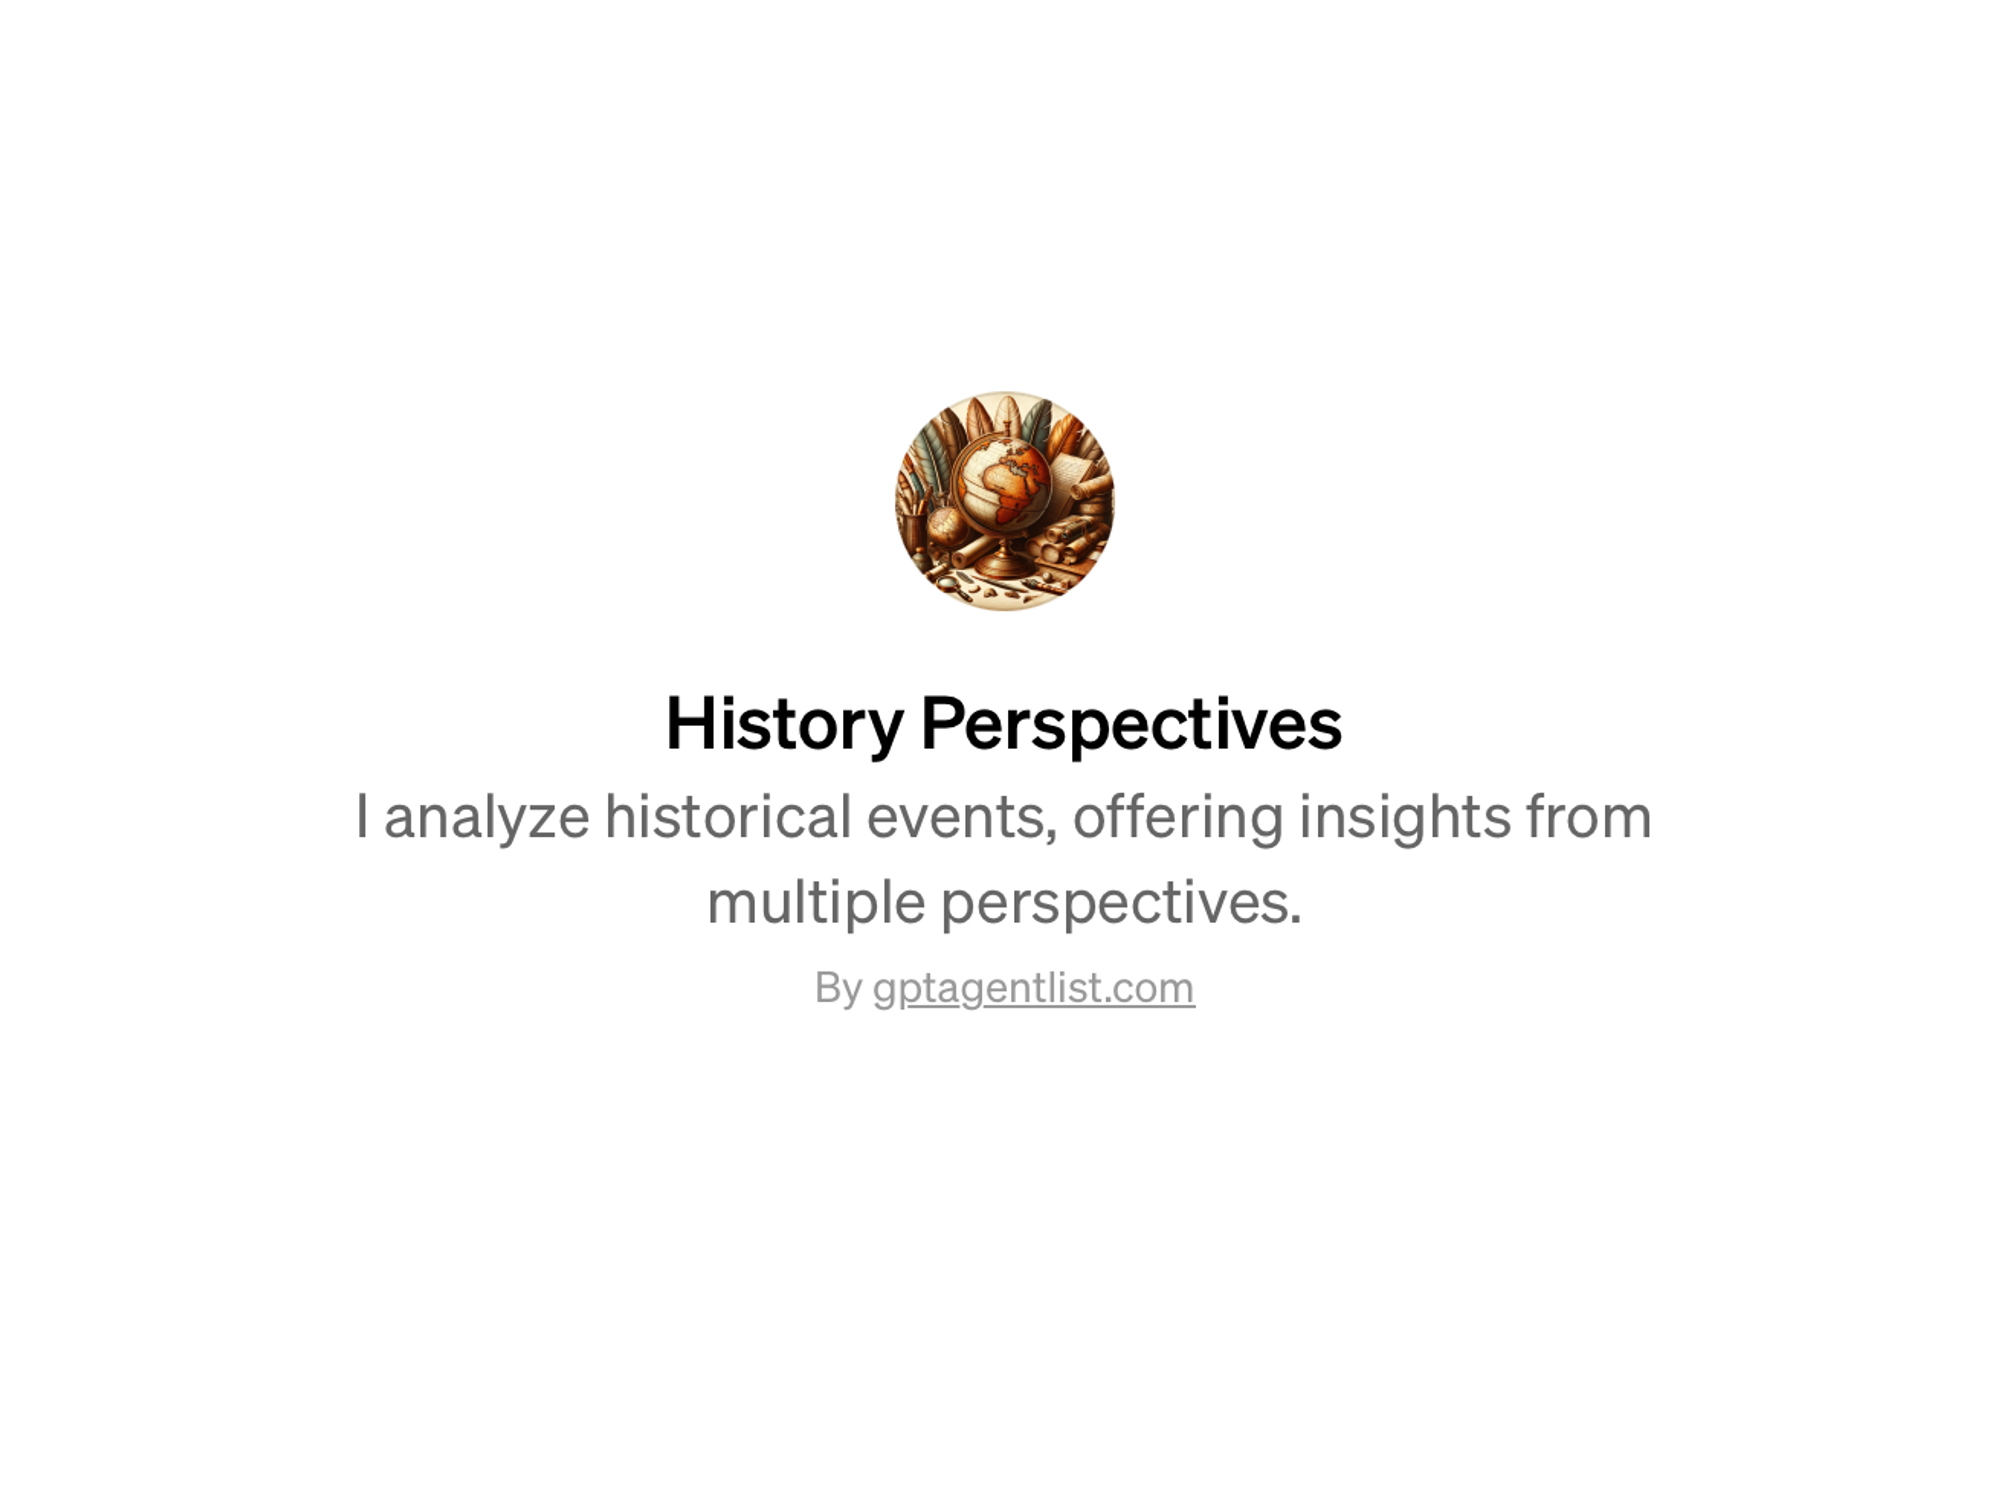 History Perspectives